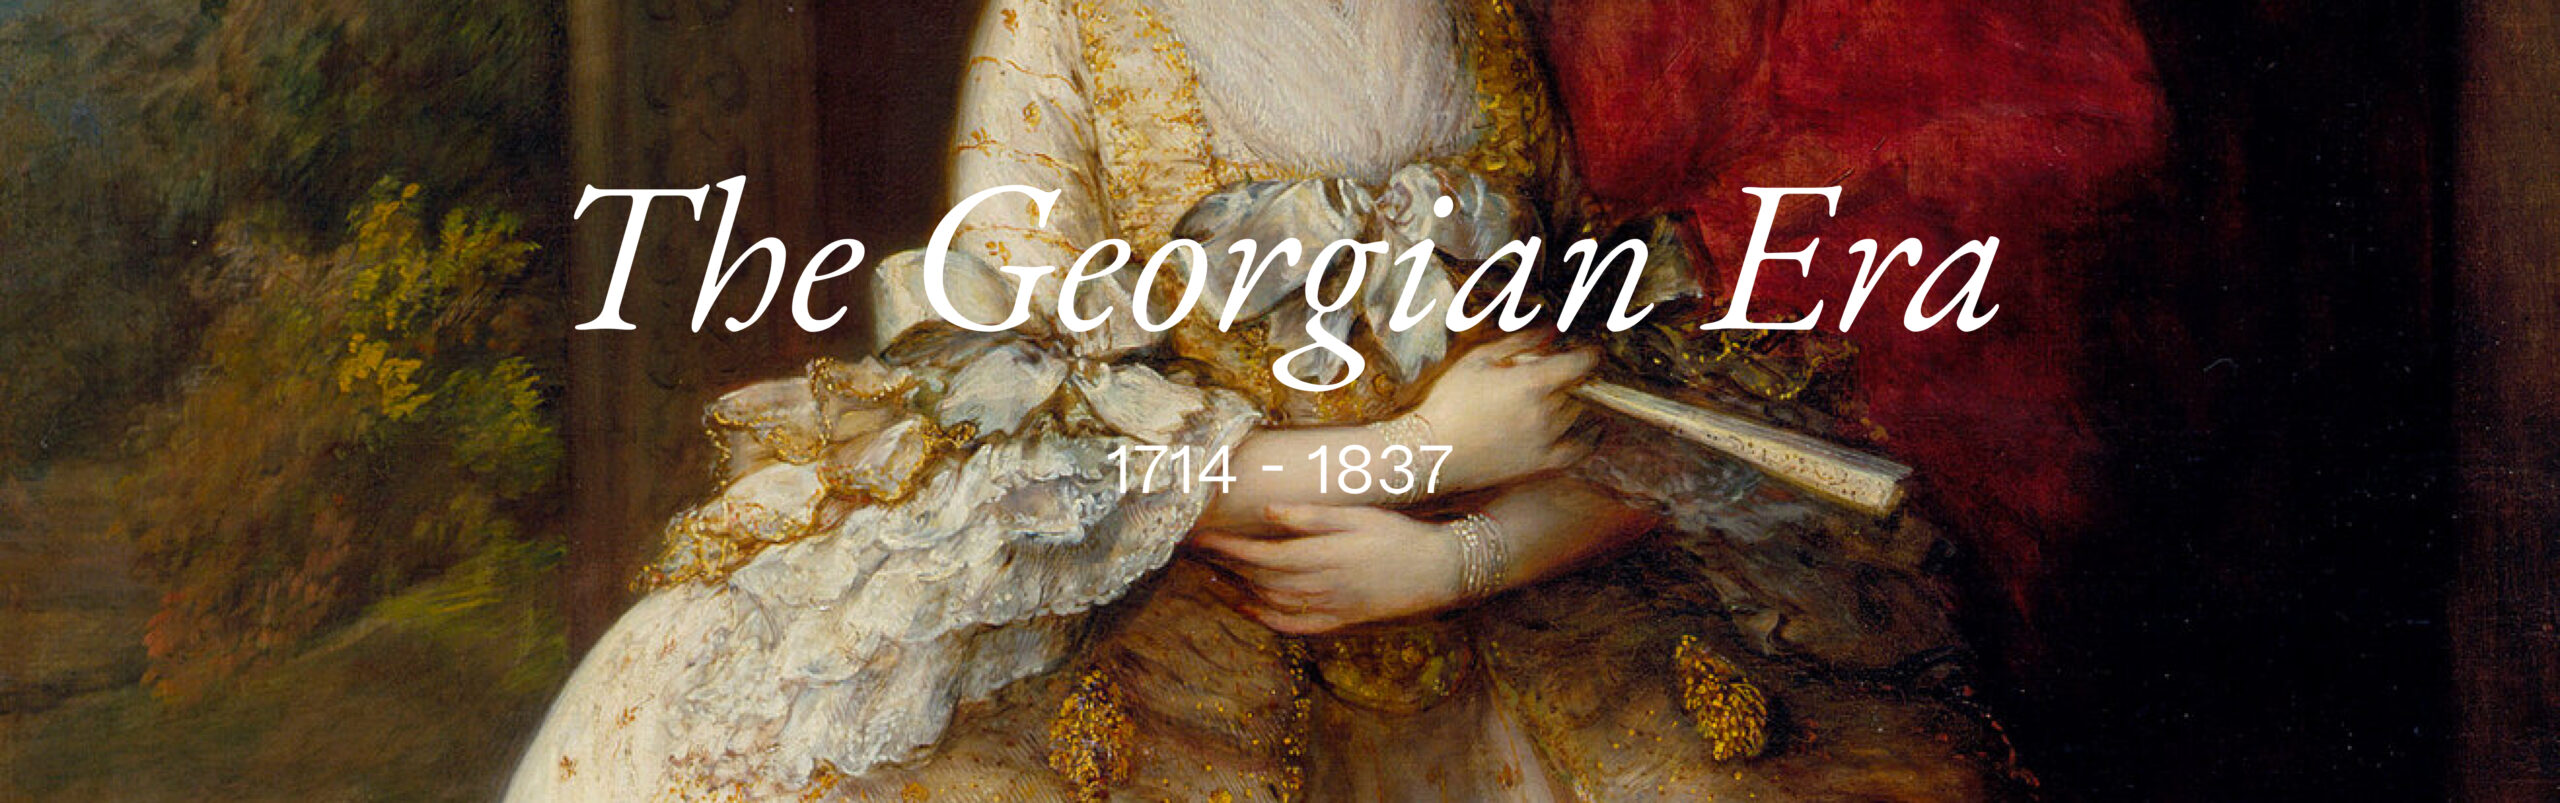 cropped photo of an Oil painting of Queen Charlotte. White text set on top of photo that reads "The Georgian Era" followed by "1714 - 1837"